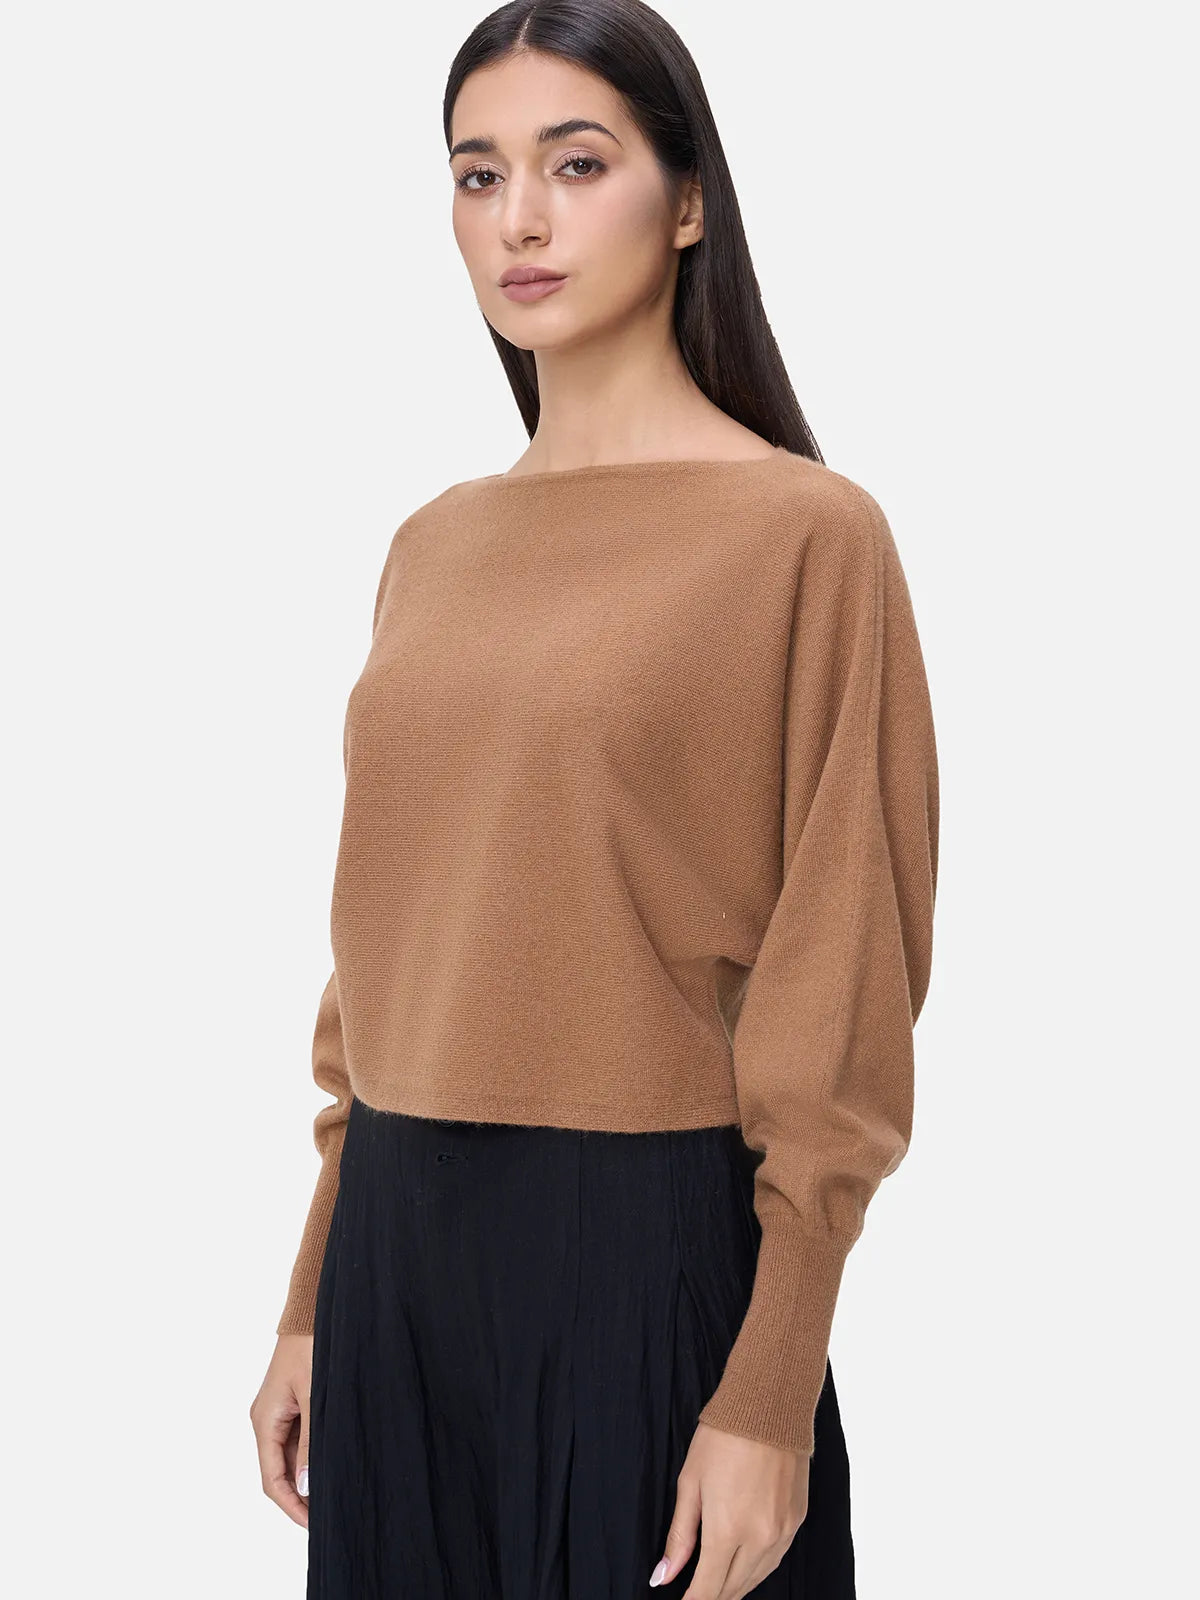 Elevate your winter wardrobe with this chic cashmere sweater, boasting a short length and stylish batwing sleeves in a versatile solid color for a modern and cozy look.